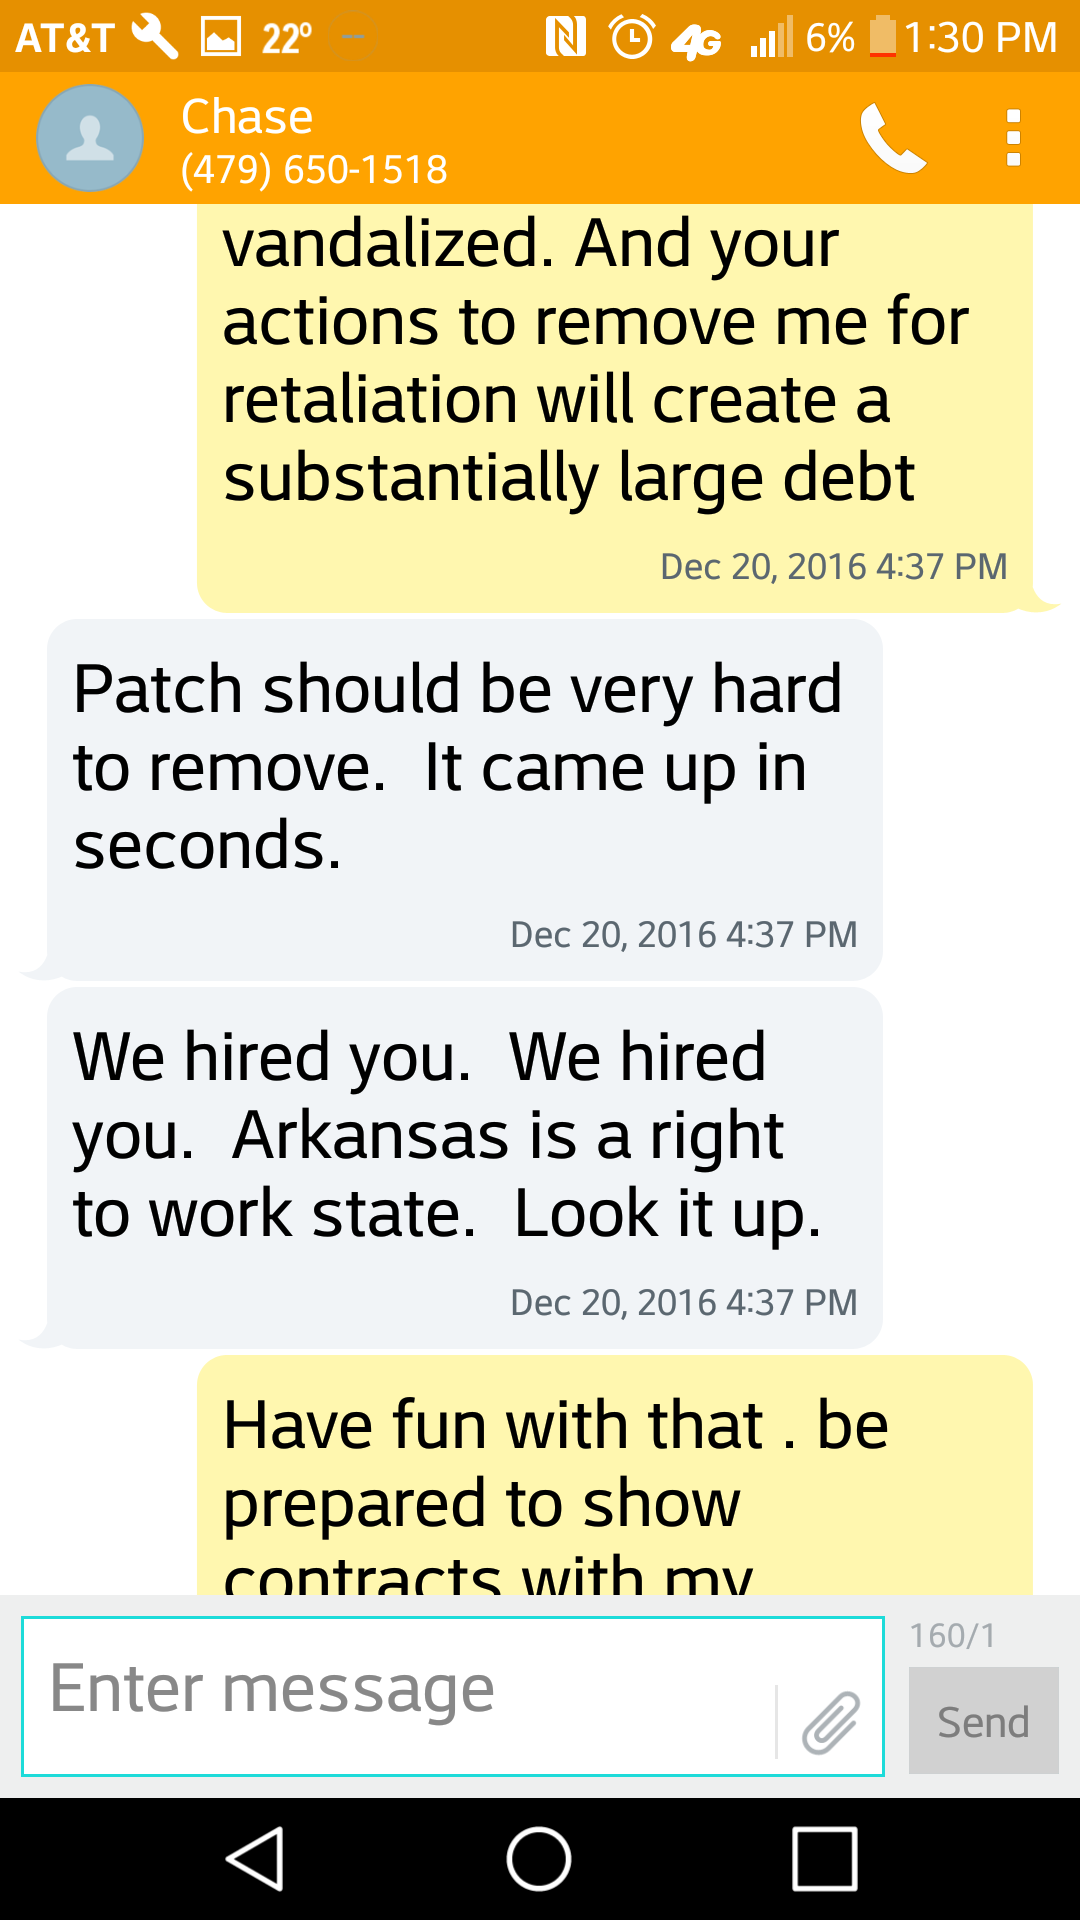 More text confirming fraud and theft